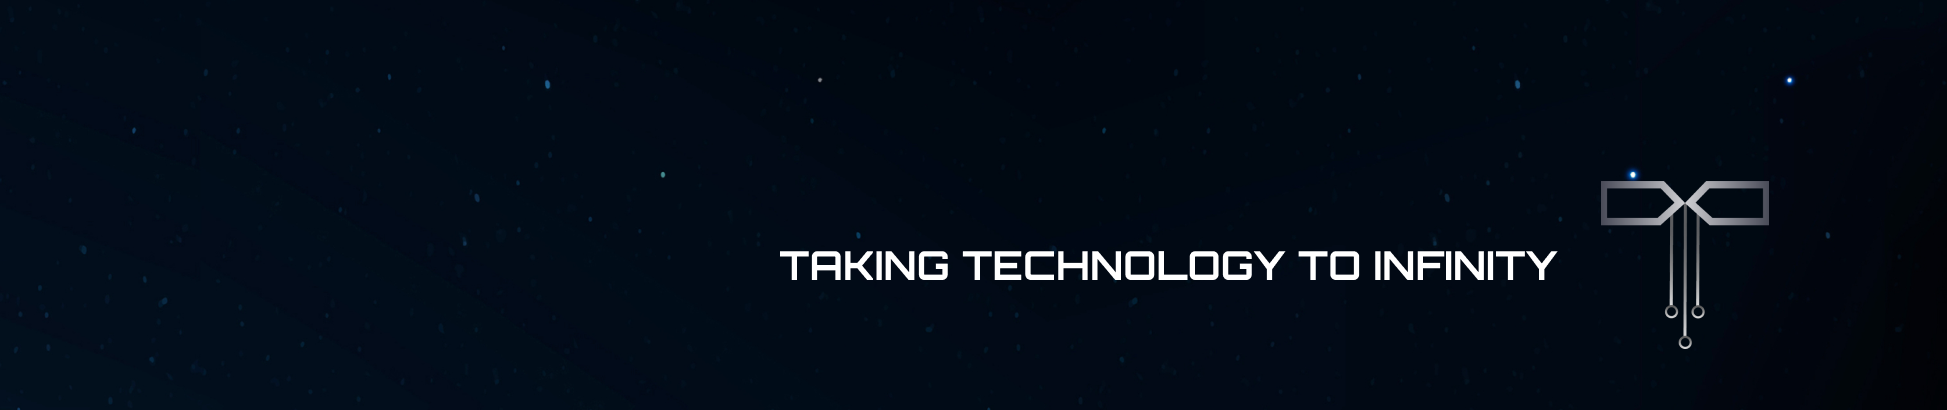 Texinity Technologies's profile banner